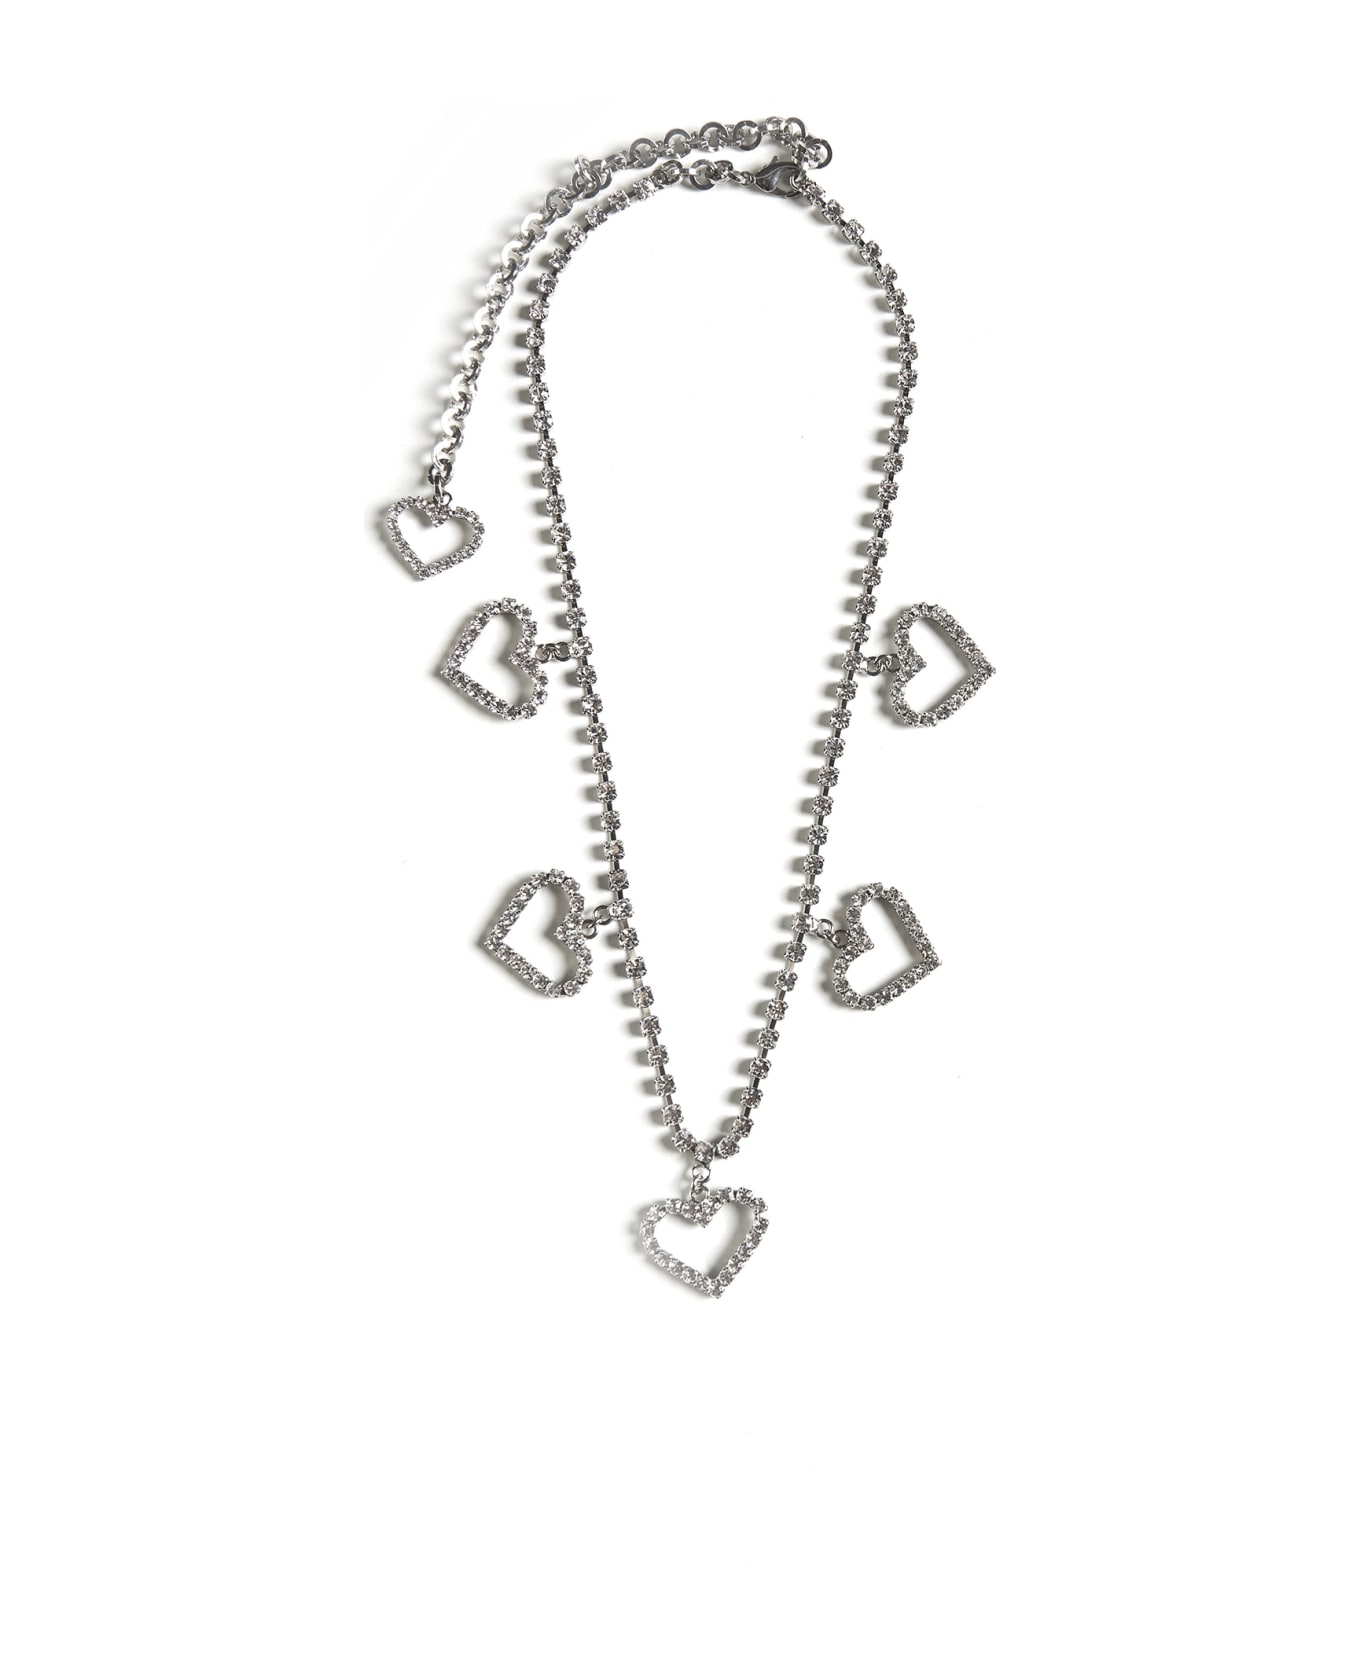 Alessandra Rich Necklace - Cry silver